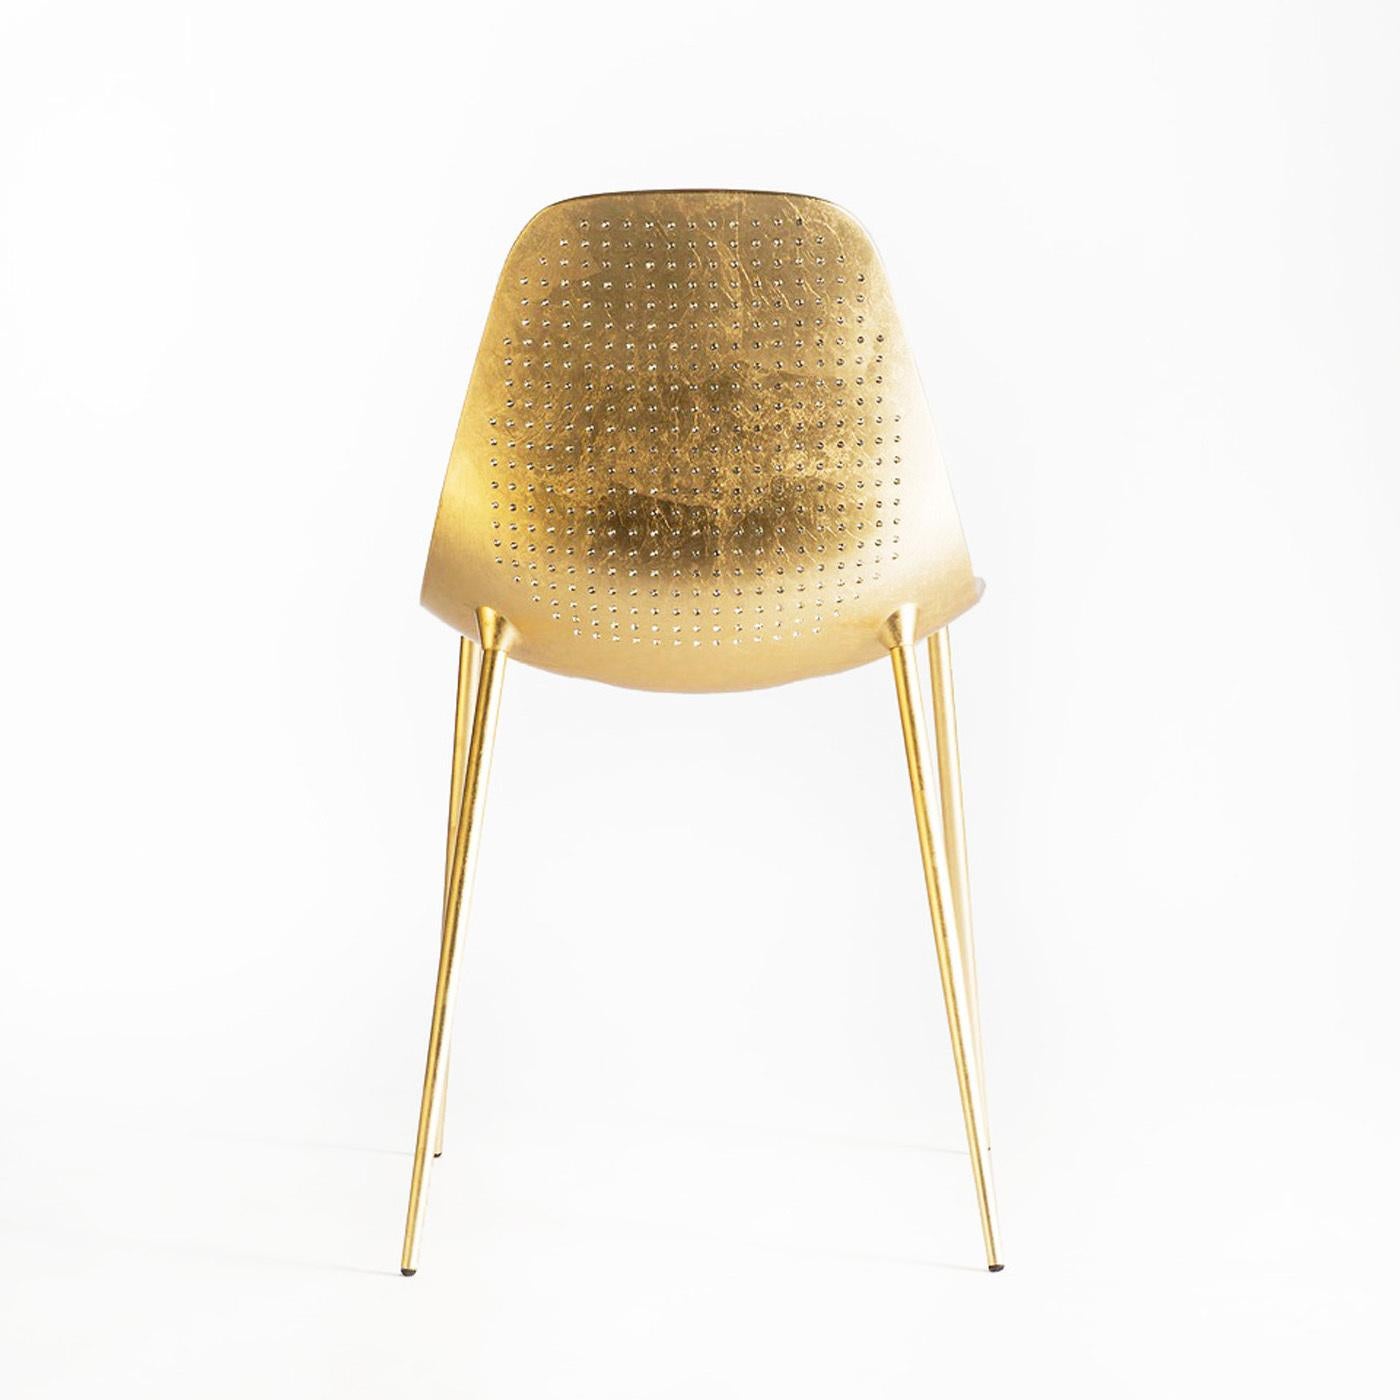 This striking chair has a structural skin in aluminum supported by a zinc-coated metal structure. The chair is hand-finished with 24-karat gold leaf and 398 Swarovski elements hand-applied to give a unique texture to its outside surface.